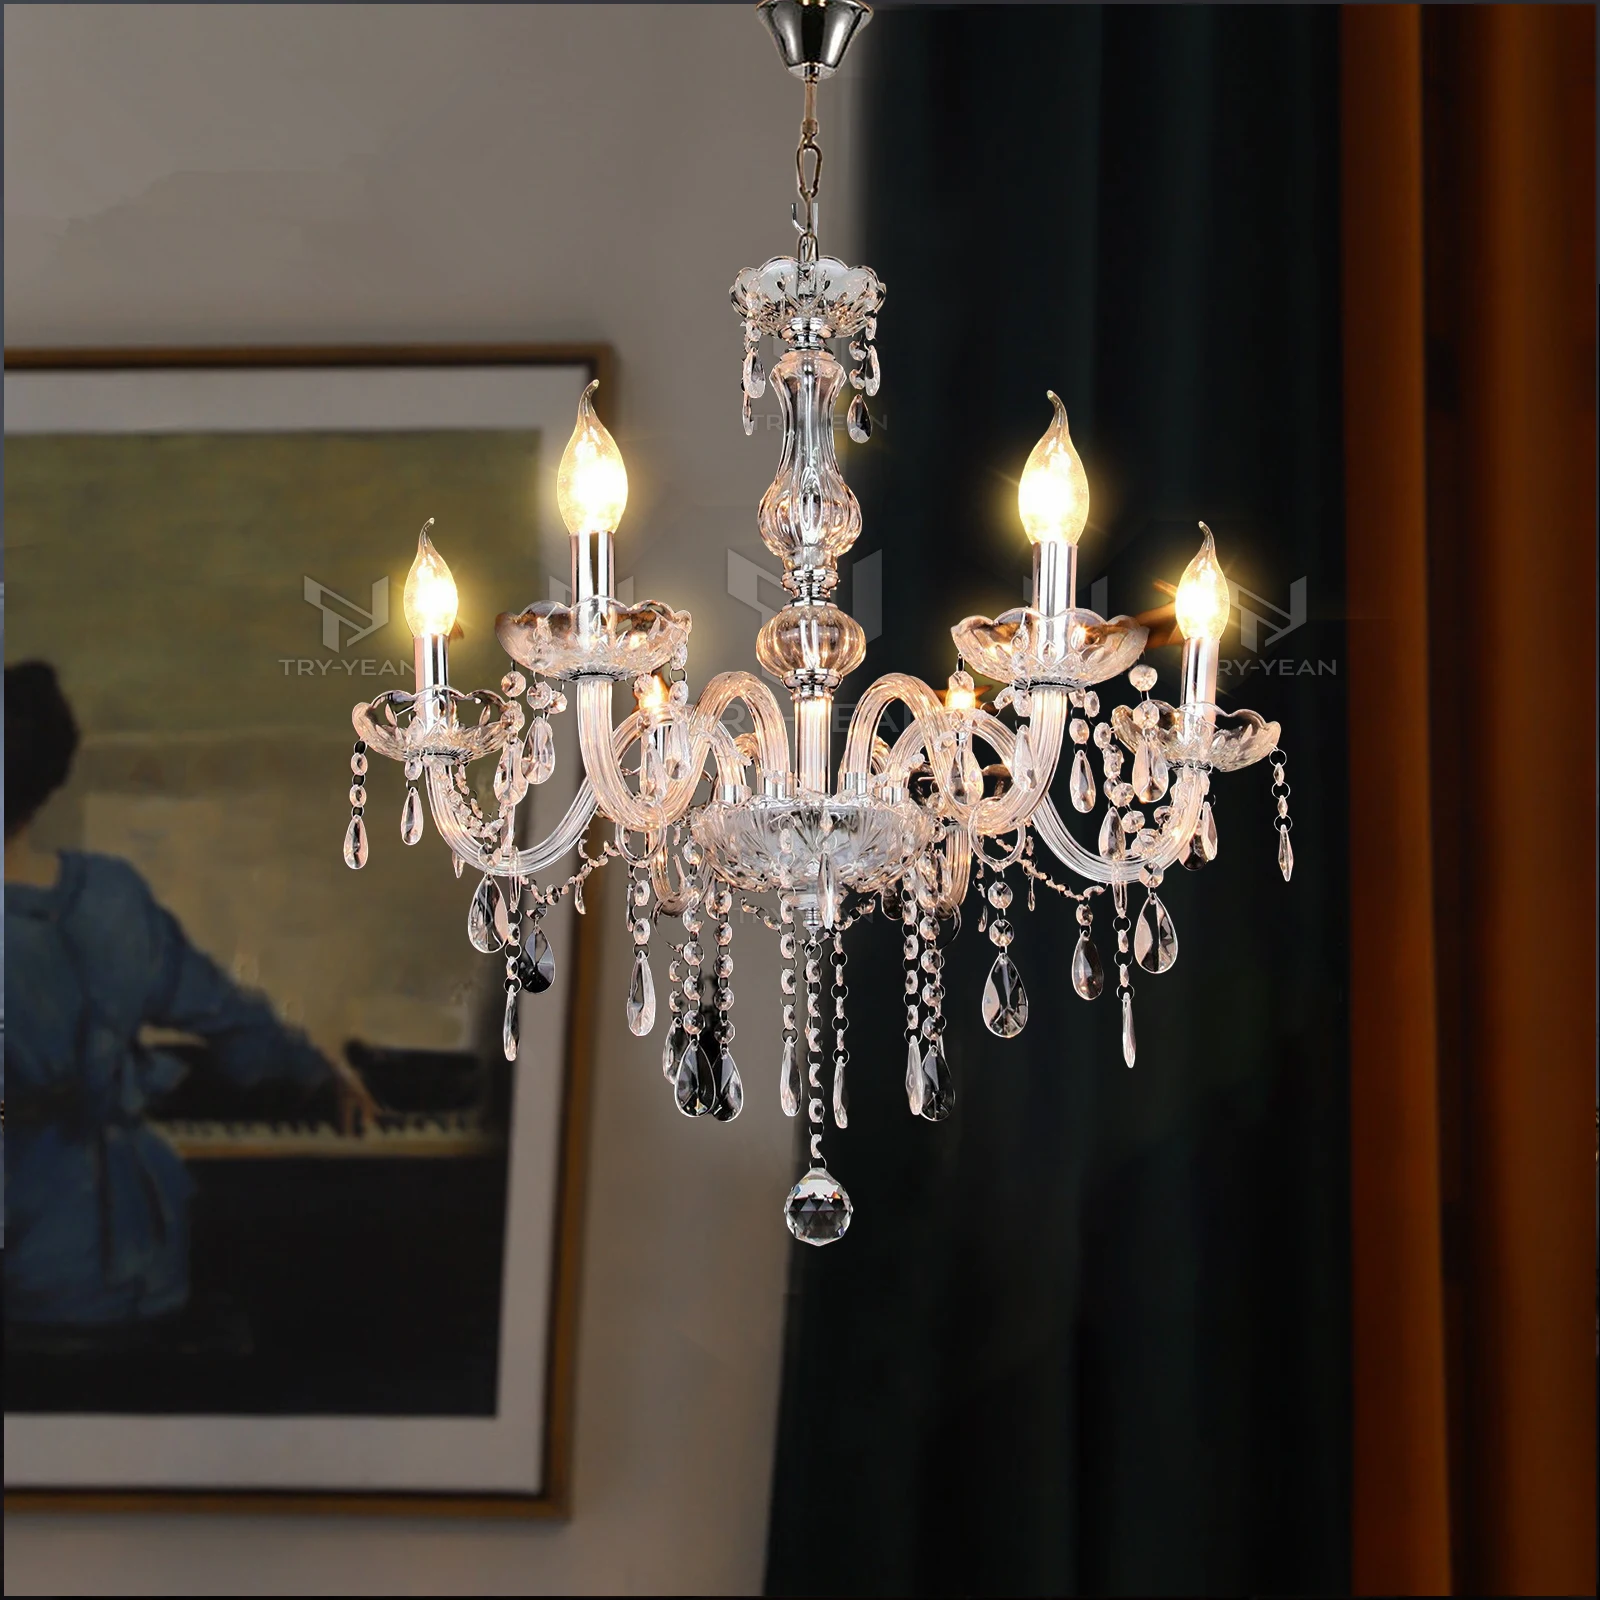 TRY-YEAN Transparent Cognac Crystal Glass 6 Arms Chandelier Glass Living... - $98.60+